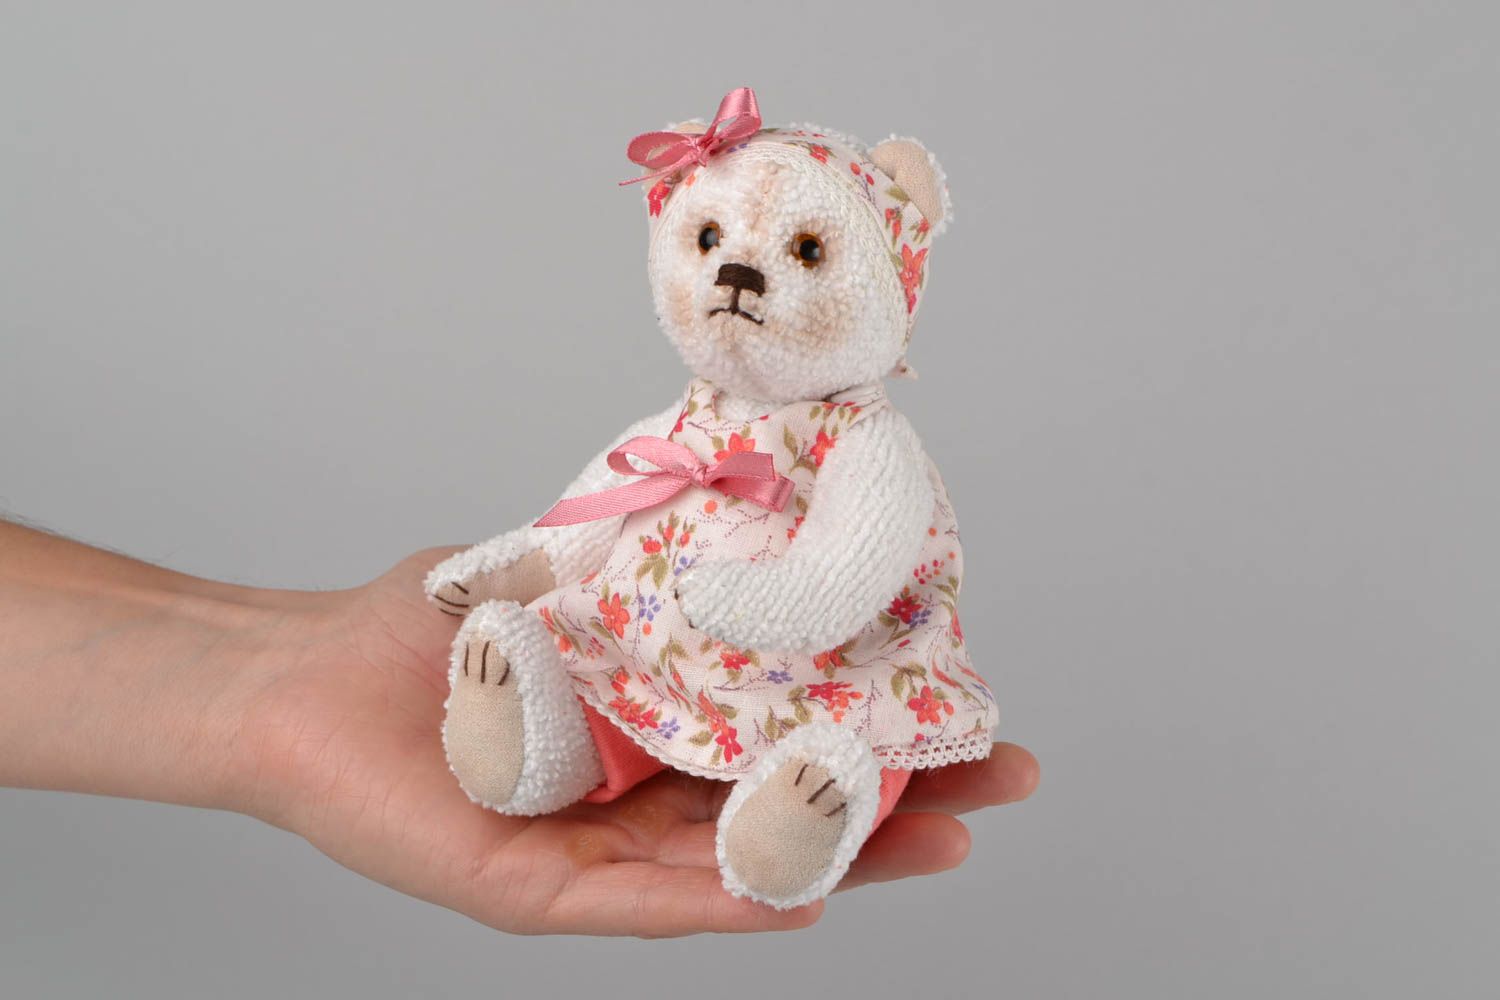 Handmade designer small fabric soft toy white bear in floral dress with headband photo 2